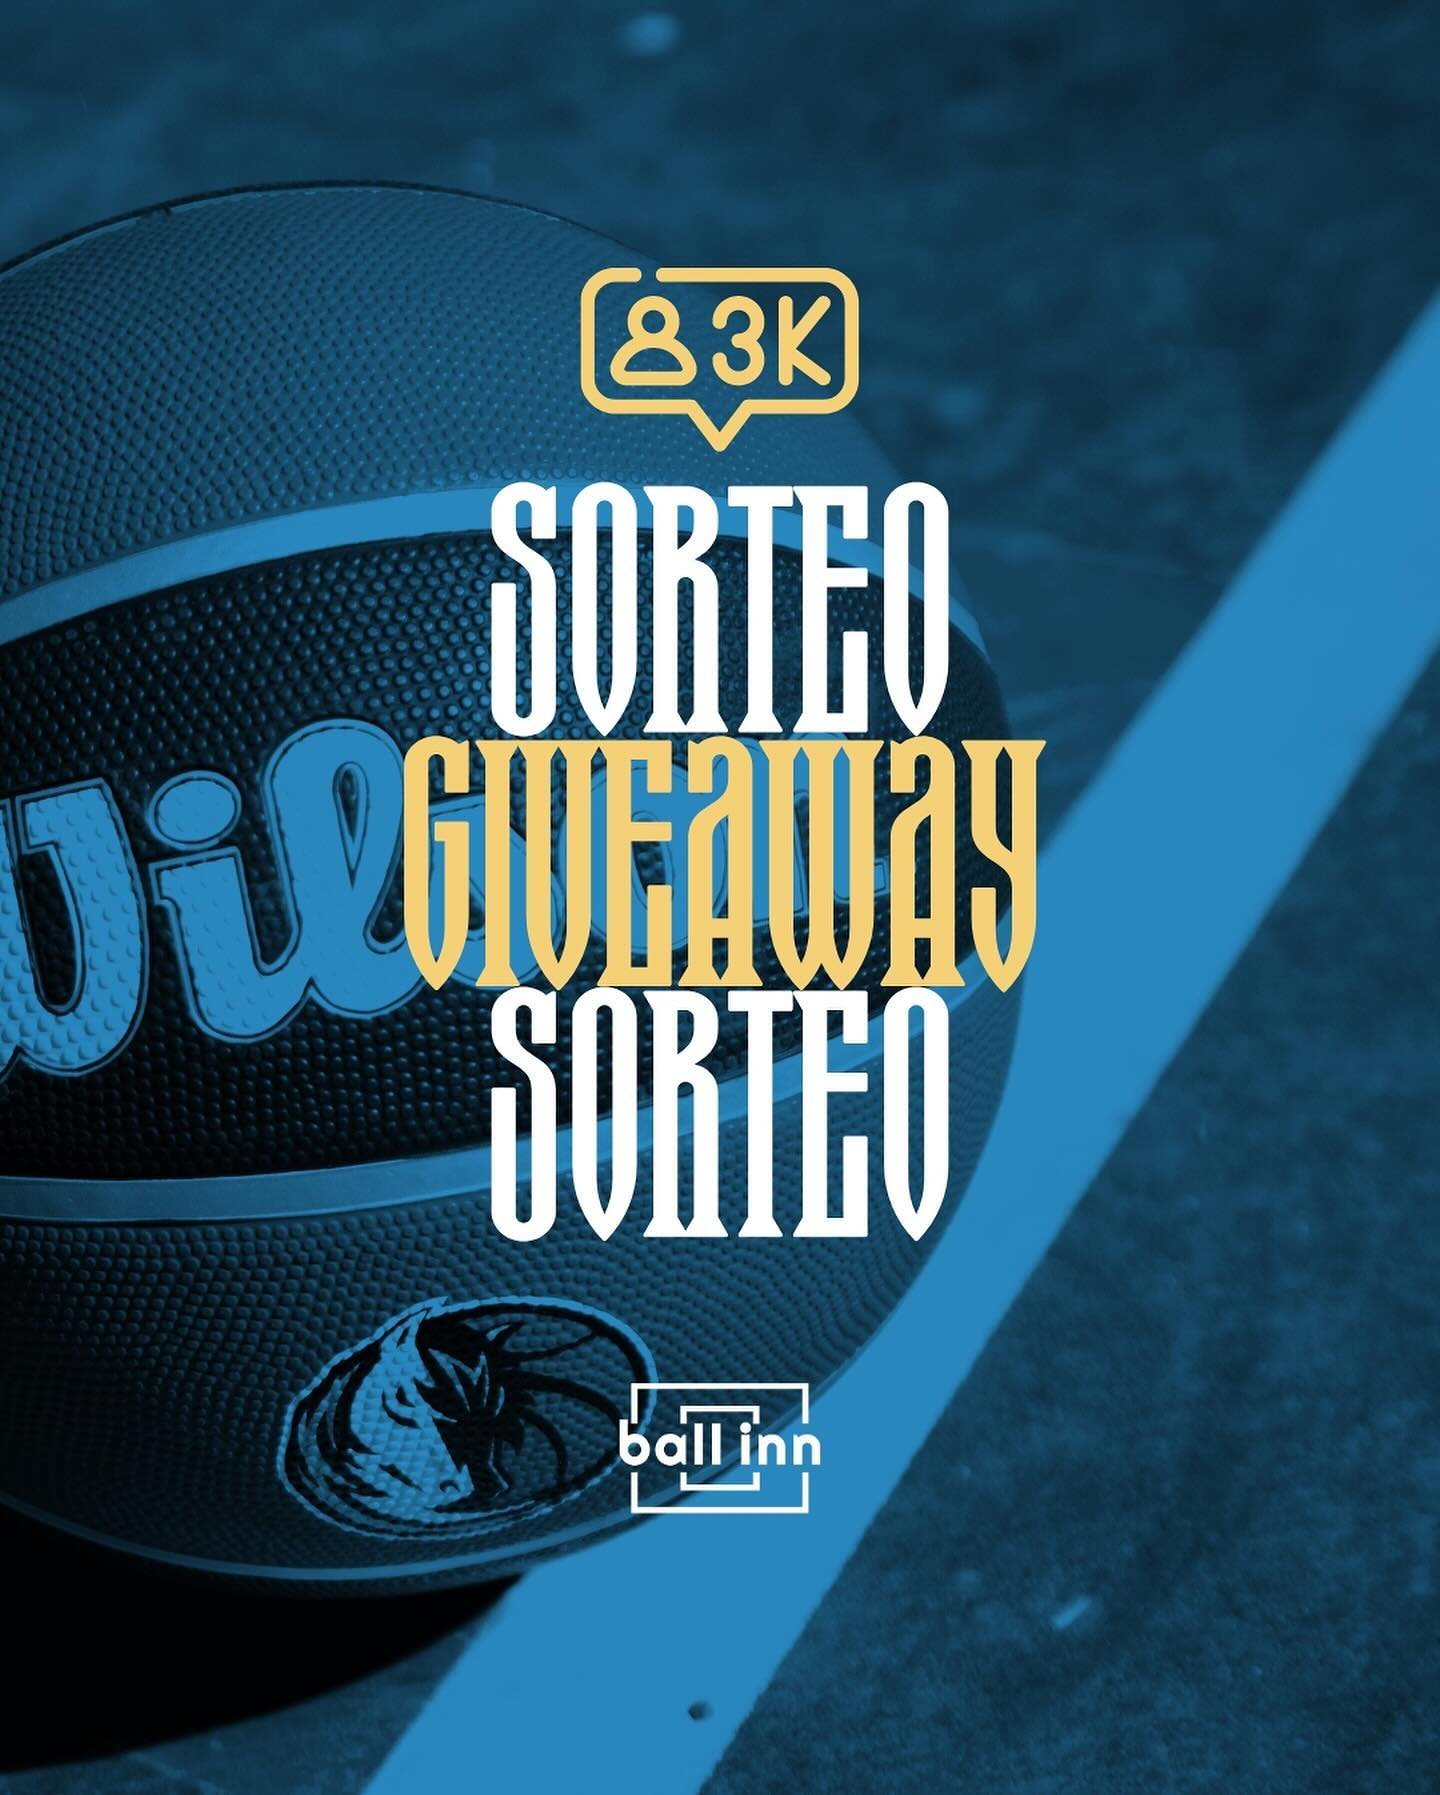 🚨📣3K SORTEO!! To celebrate ALL OF YOU joining the Ball inn family, we are giving away a size 7 basketball from one of the hottest teams in the NBA right now @dallasmavs 🏀🔥🤠 

To participate, here are a few simple steps to follow: 👇
1️⃣ Follow @